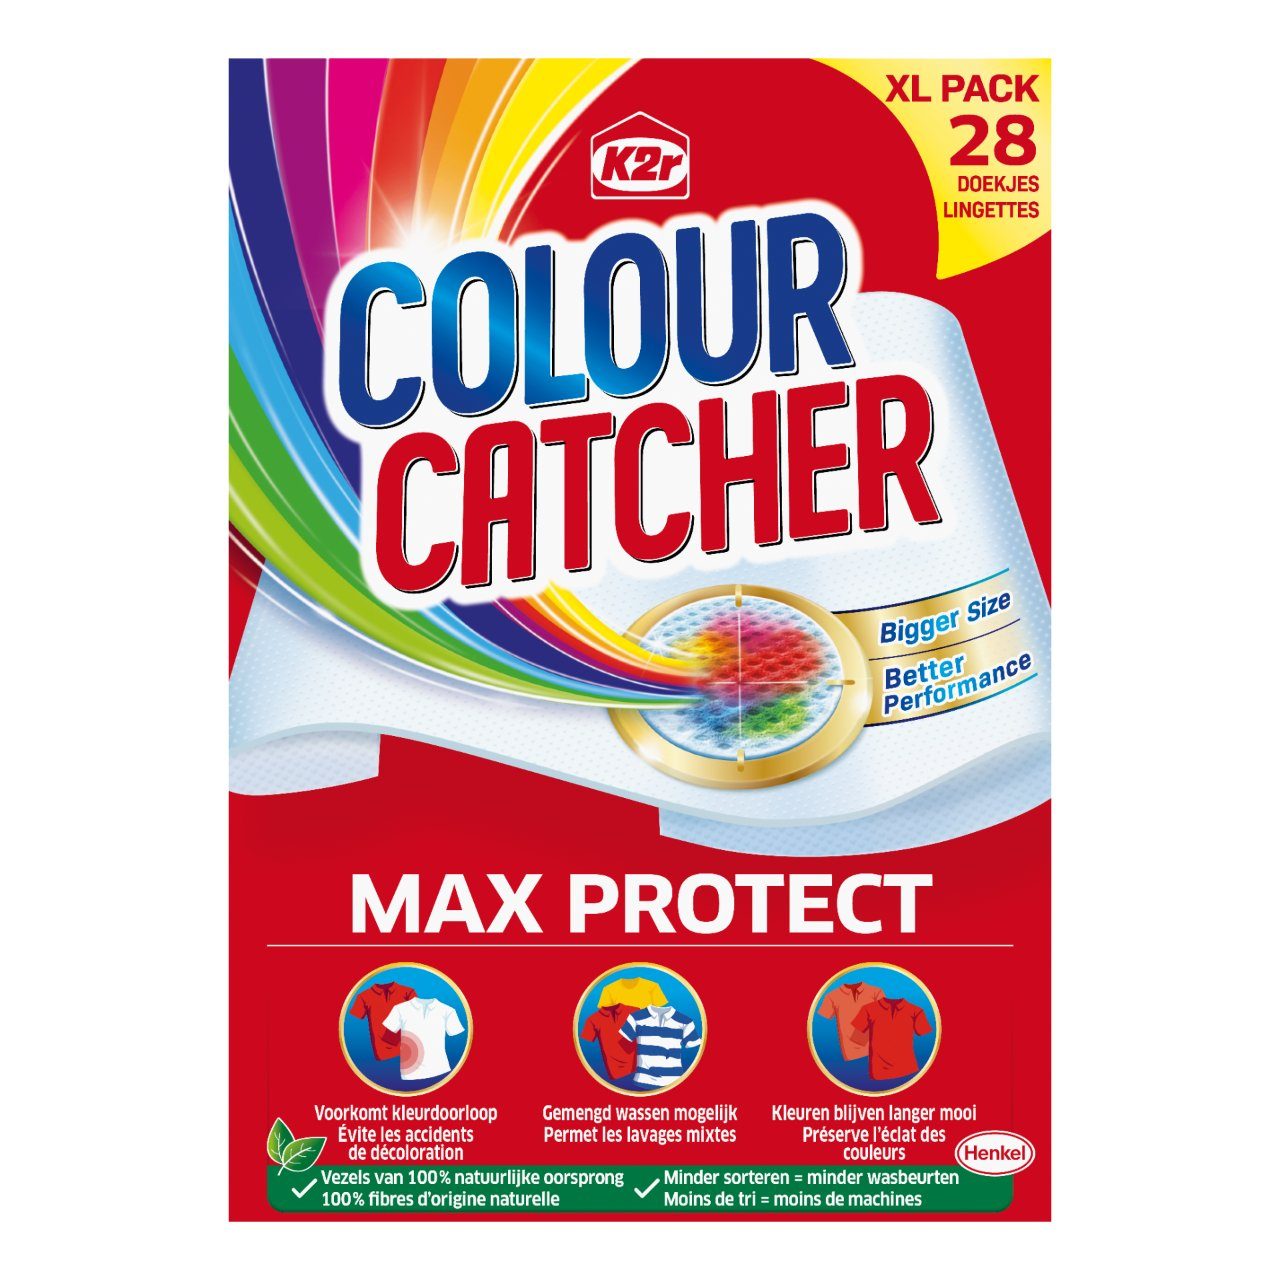 Color catcher protect